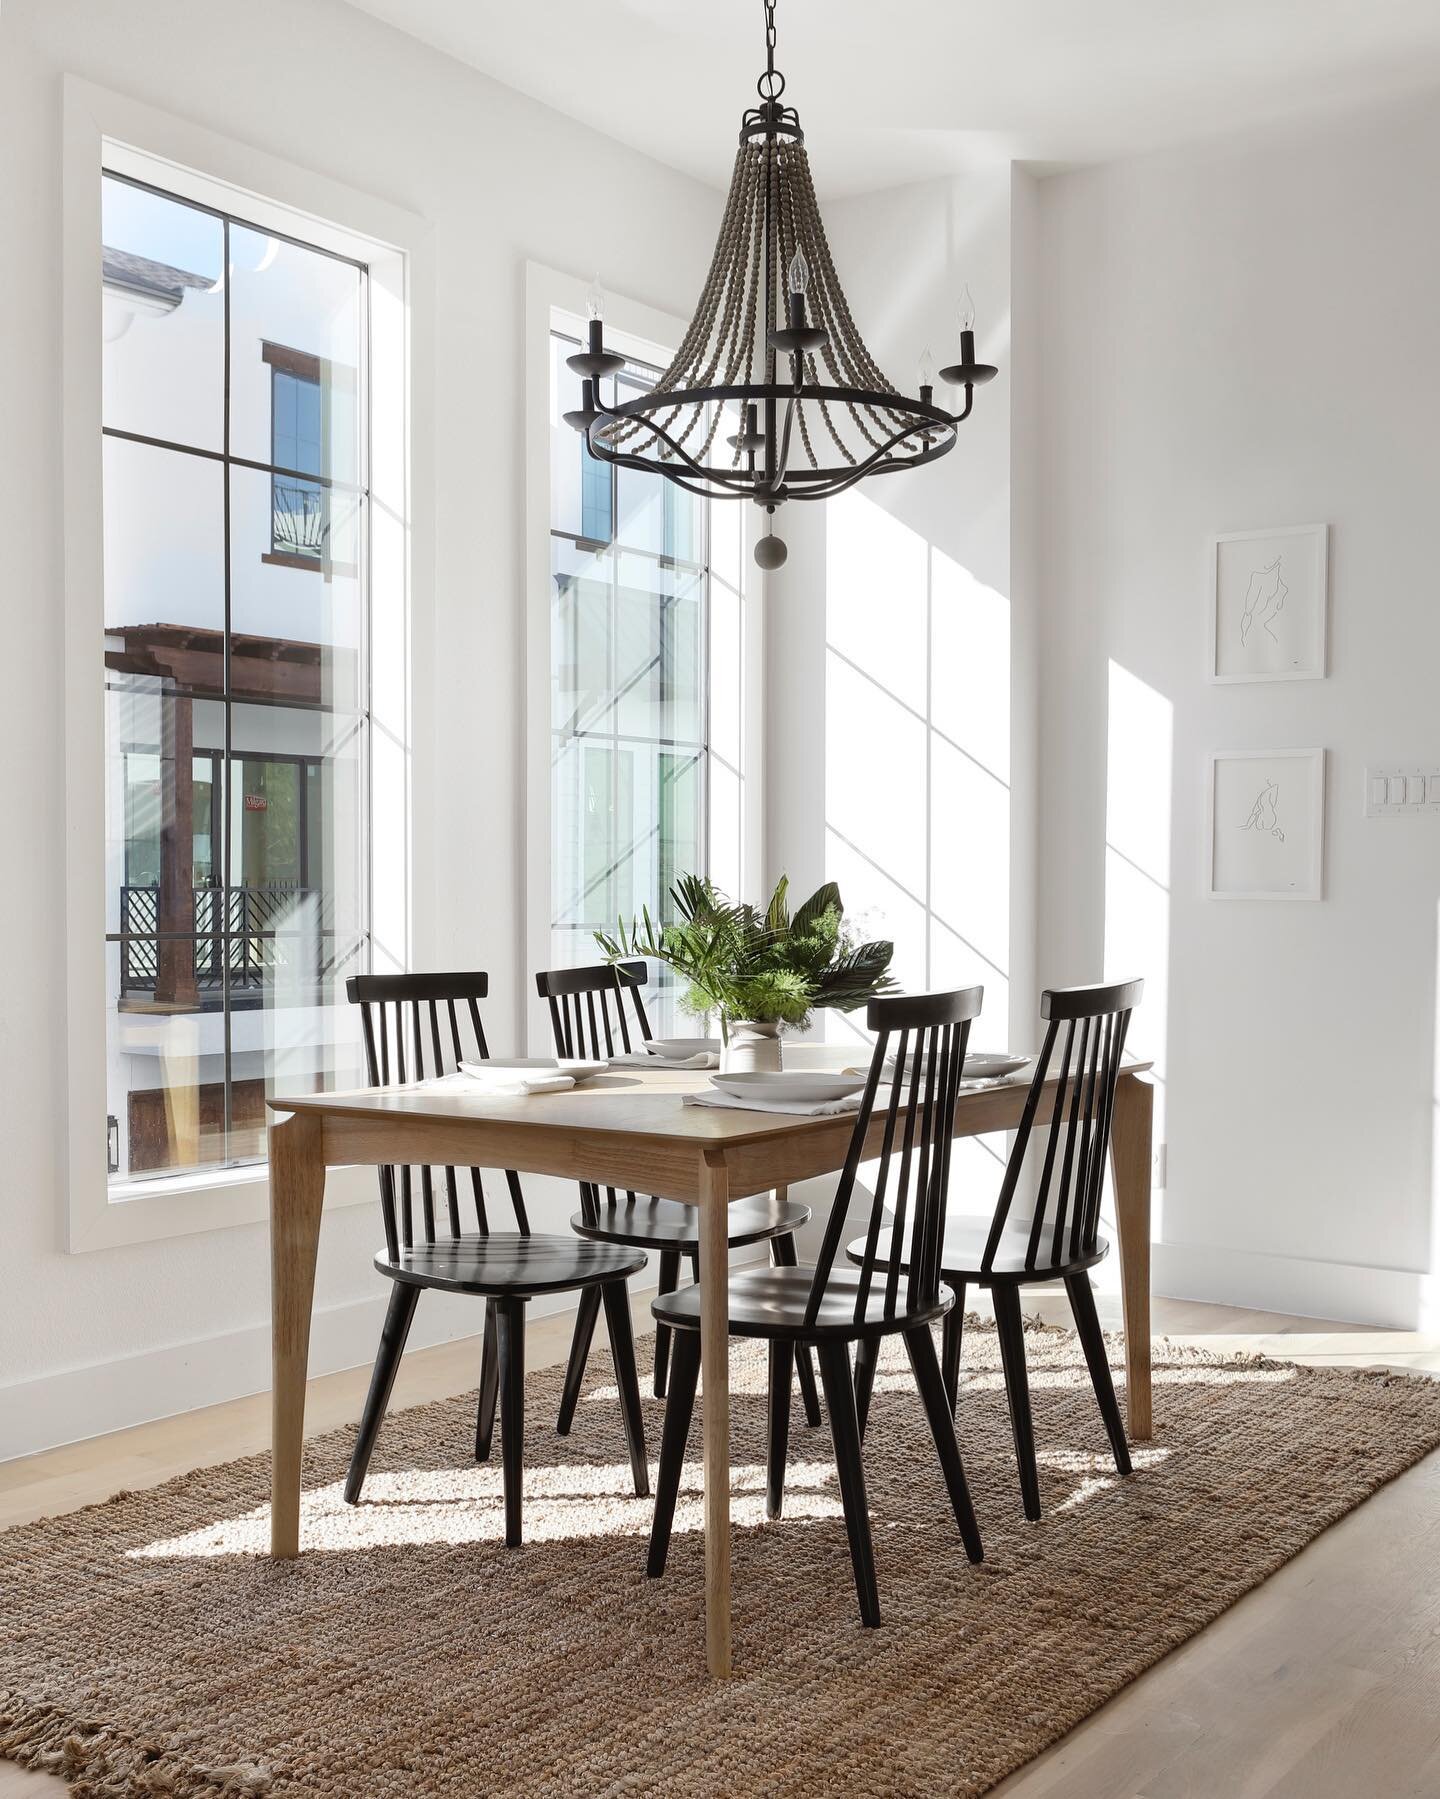 There&rsquo;s just something special natural light does for a space. Who agrees? 
#changingroots #naturallight #realestate #newconstruction #homedecor #home